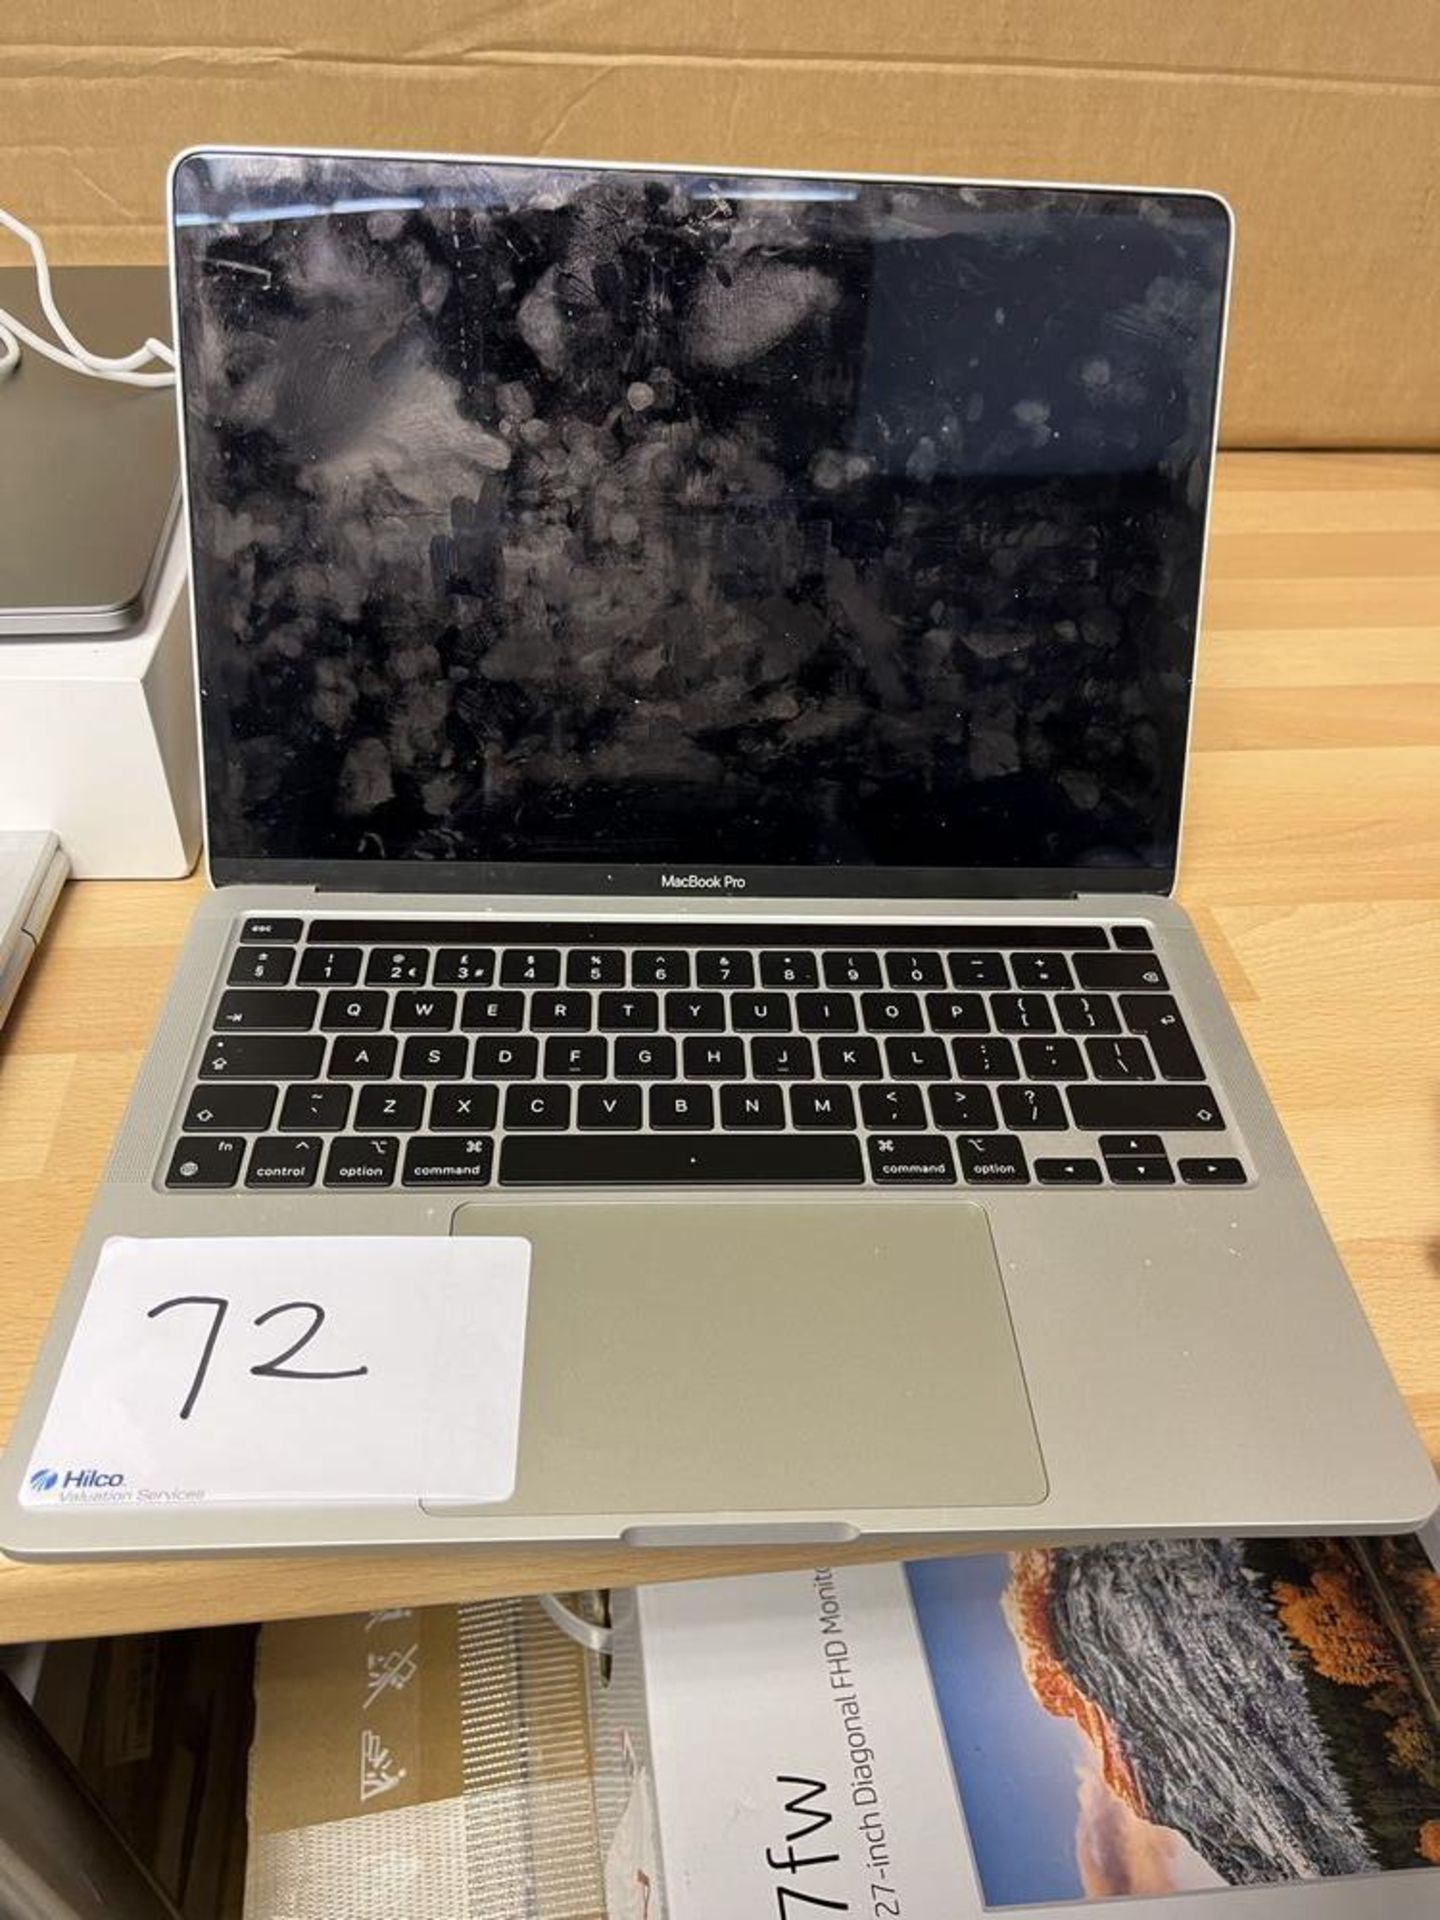 MacBook Pro (13-inch, M1, 2020) 8GB Memory No charger Serial Number FVFFD068Q05G